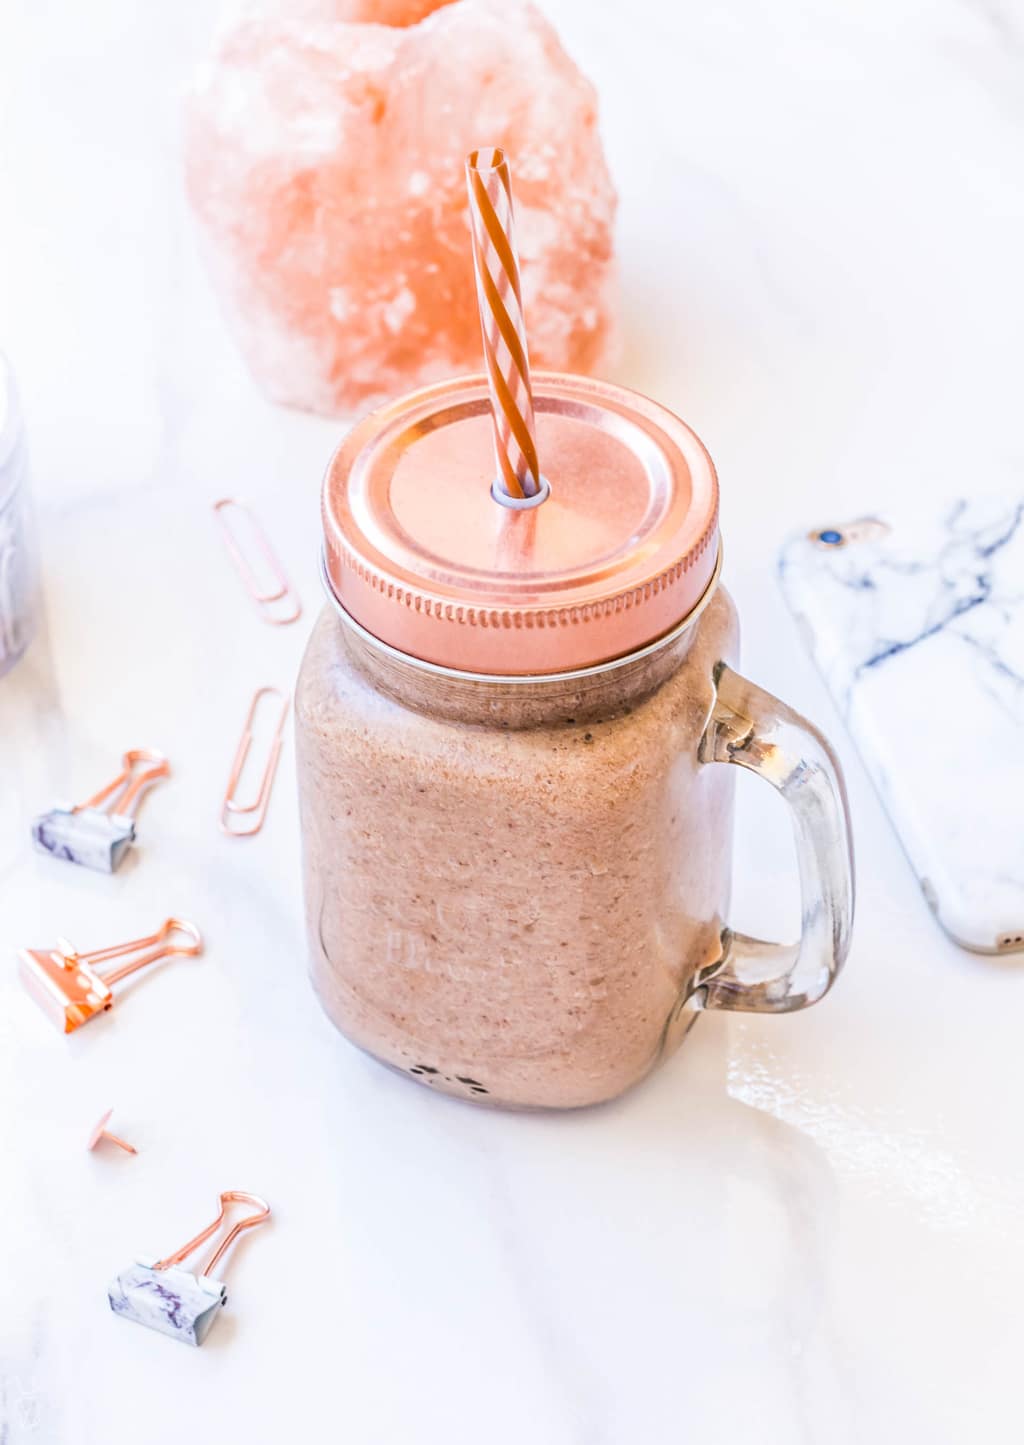 Clean Eating Iced Coffee Mocha Recipe - it's simple, SUGAR FREE, healthy drink you can make in the comfort of your home!